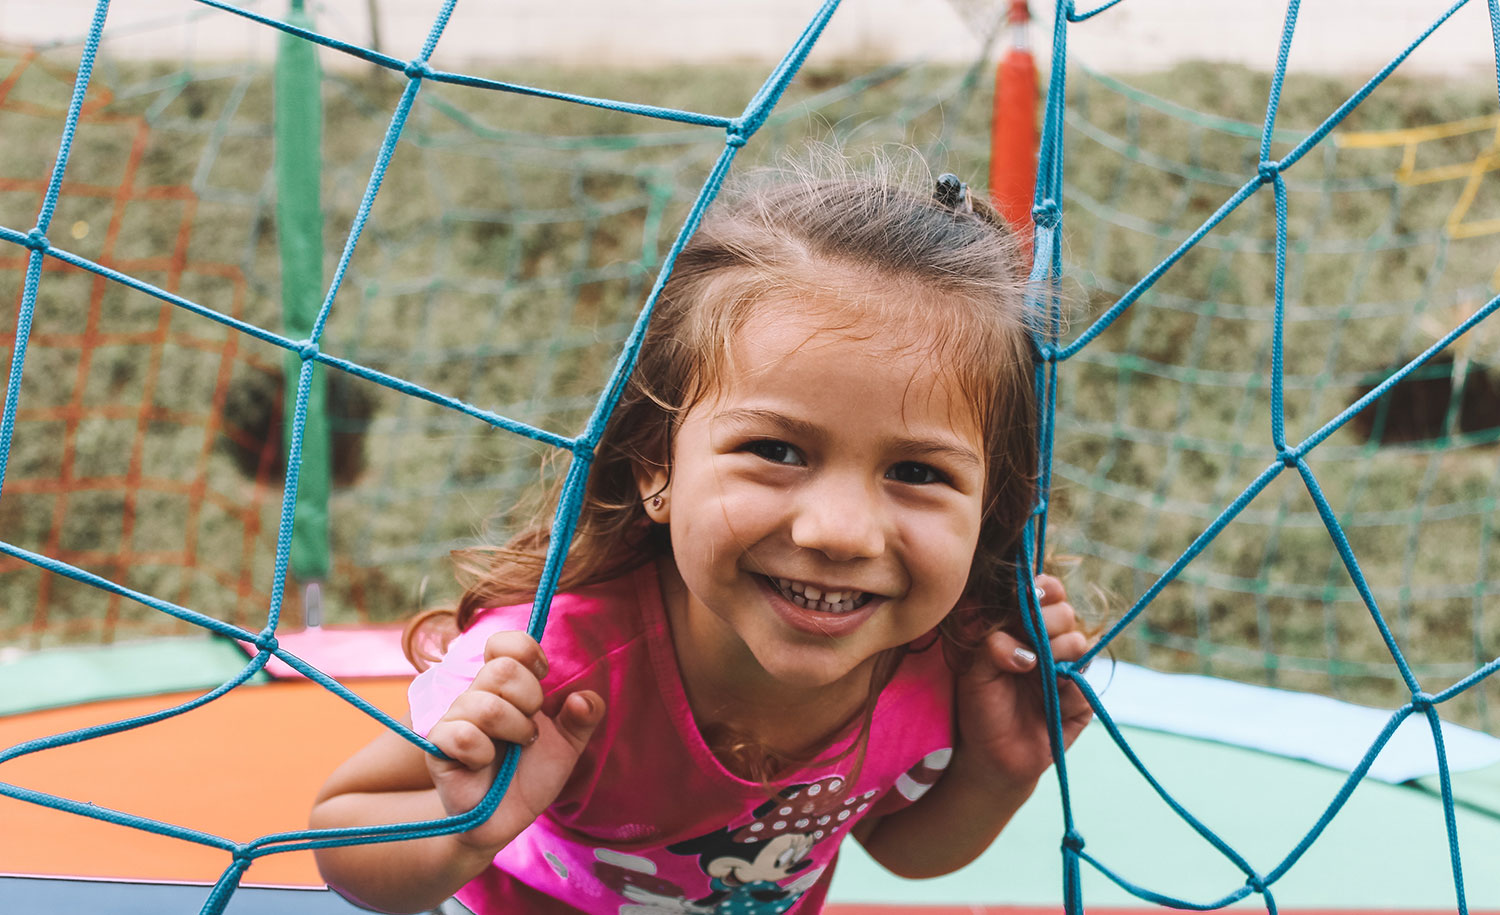 A young girl on a trampoline, smiling